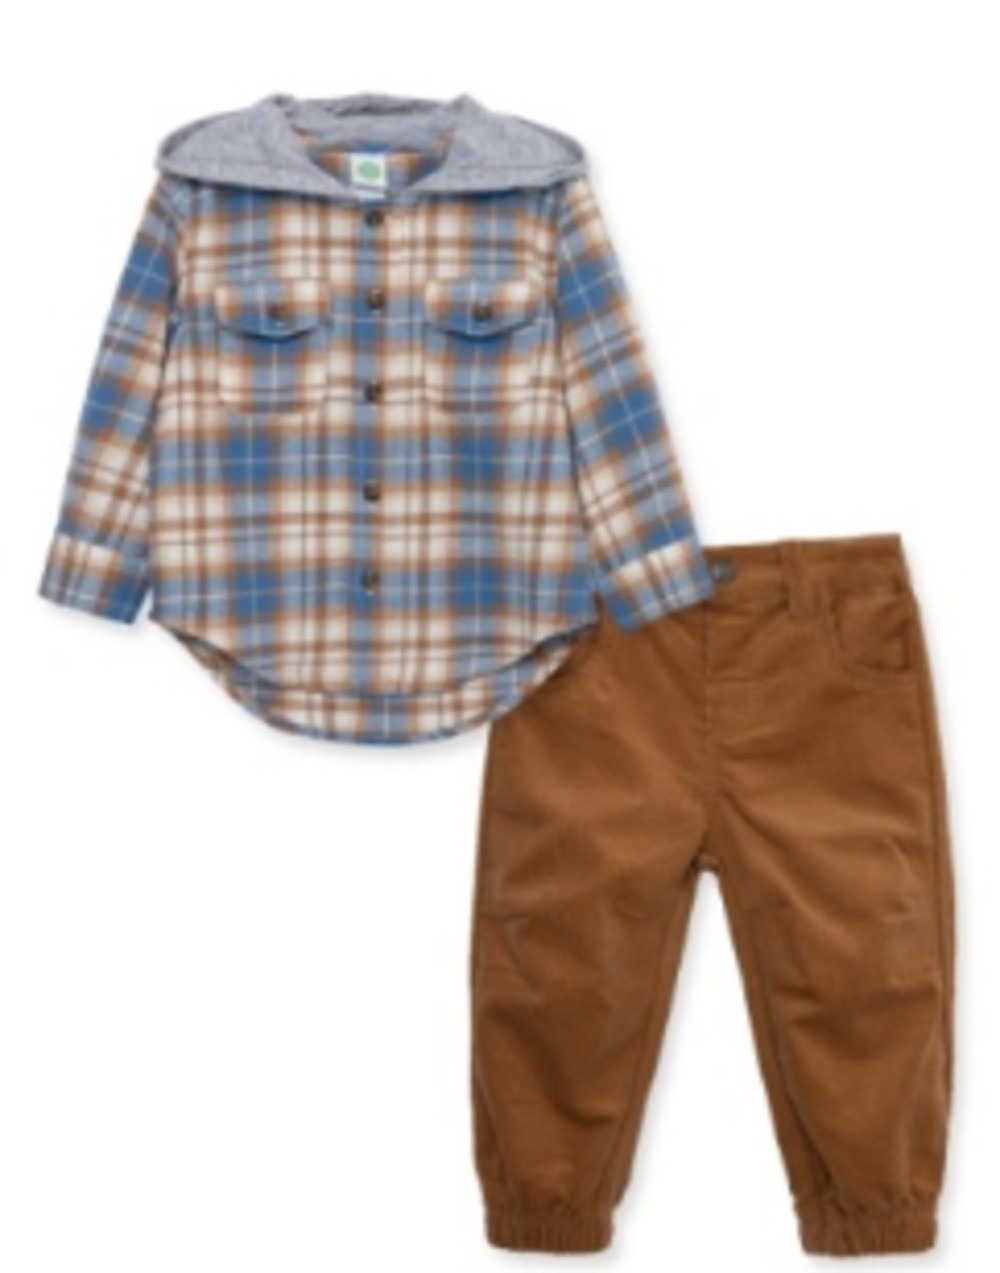 LITTLE ME LPB13665 TODDLER BOYS BLUE AND BROWN PLAID HOODED CORDUROY PANT SET 